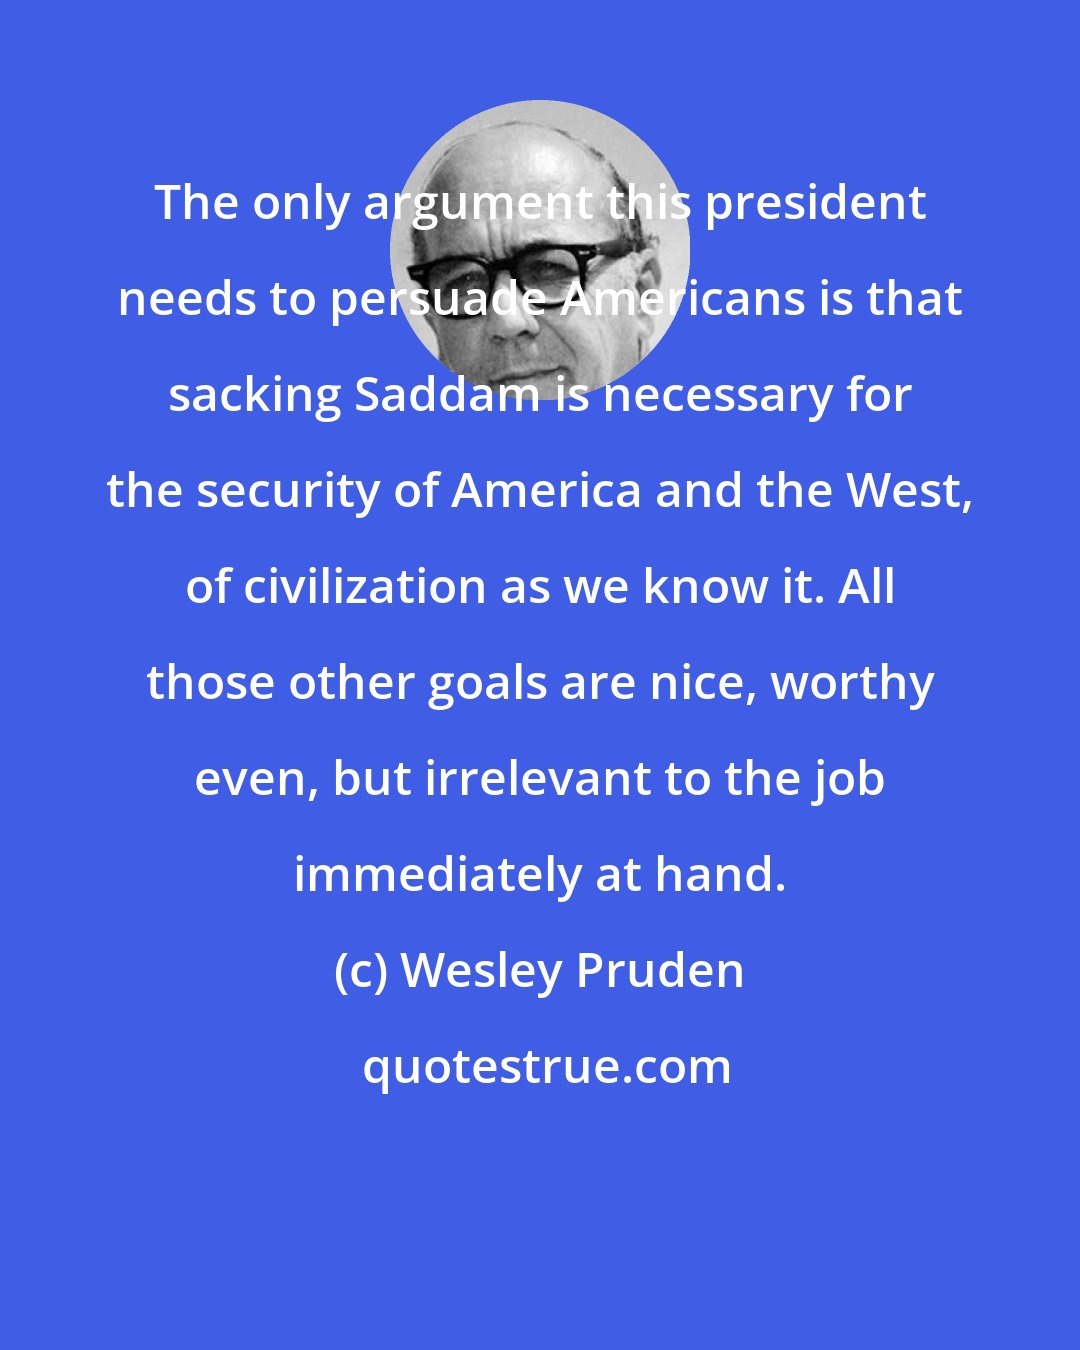 Wesley Pruden: The only argument this president needs to persuade Americans is that sacking Saddam is necessary for the security of America and the West, of civilization as we know it. All those other goals are nice, worthy even, but irrelevant to the job immediately at hand.